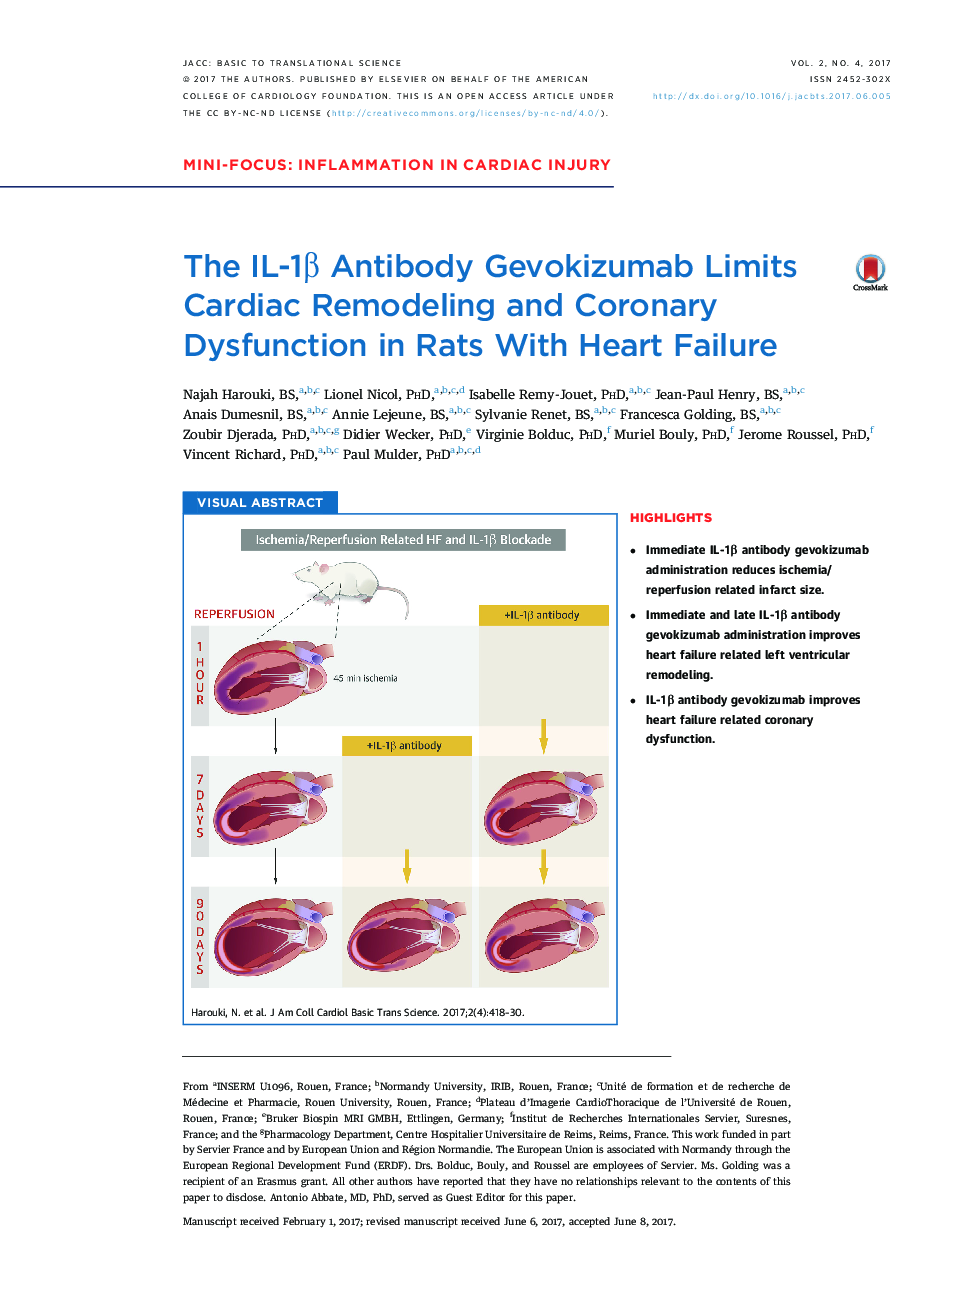 The IL-1Î² Antibody Gevokizumab Limits Cardiac Remodeling and Coronary Dysfunction in Rats With Heart Failure